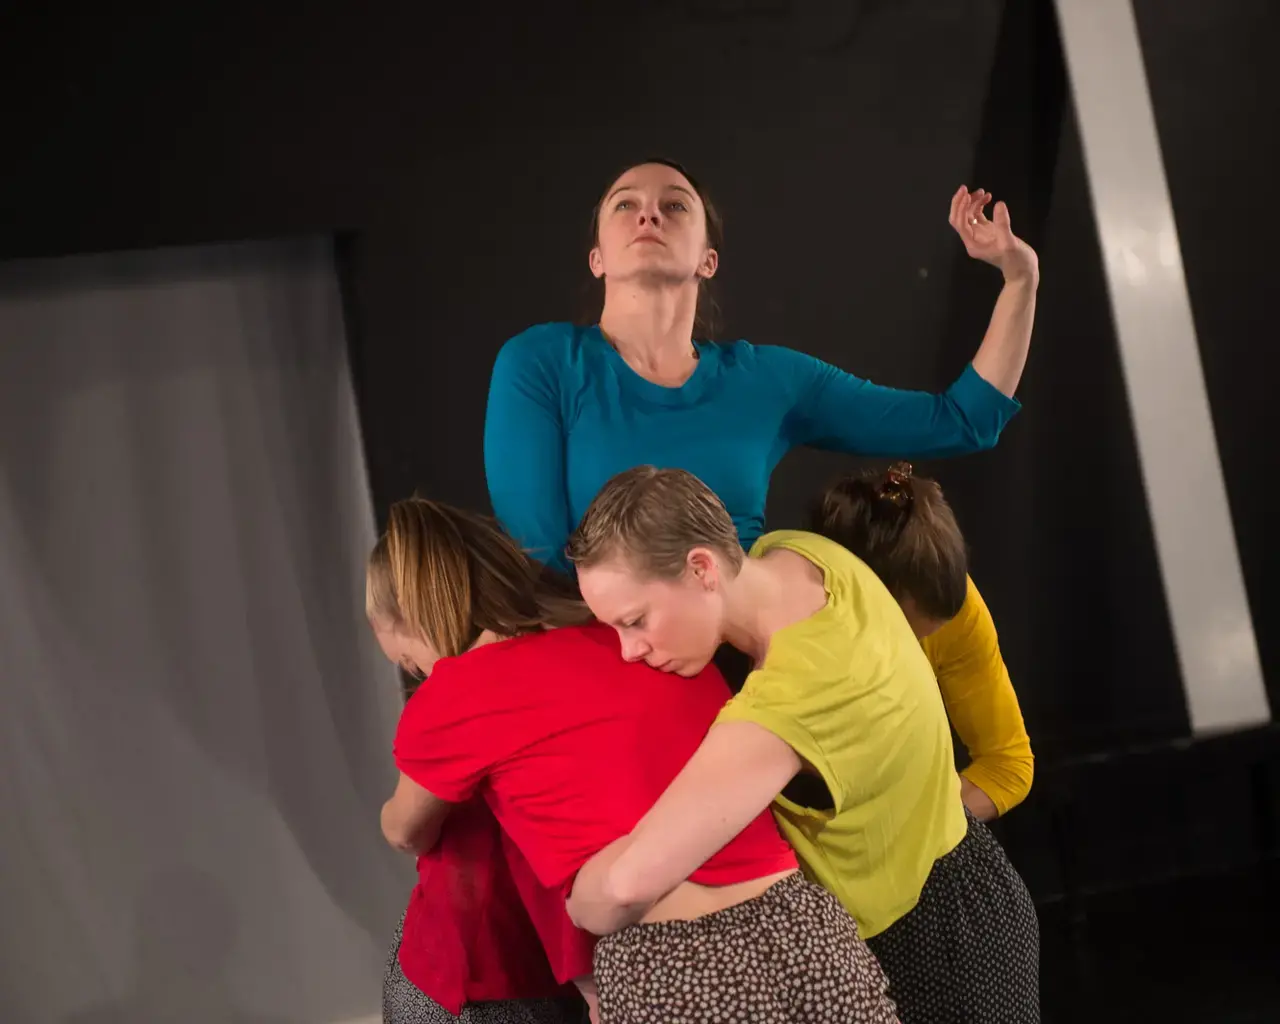 Rehearsal for Then by Group Motion Dance Company and Susan Rethorst. Photo by Jacques-Jean Tiziou.